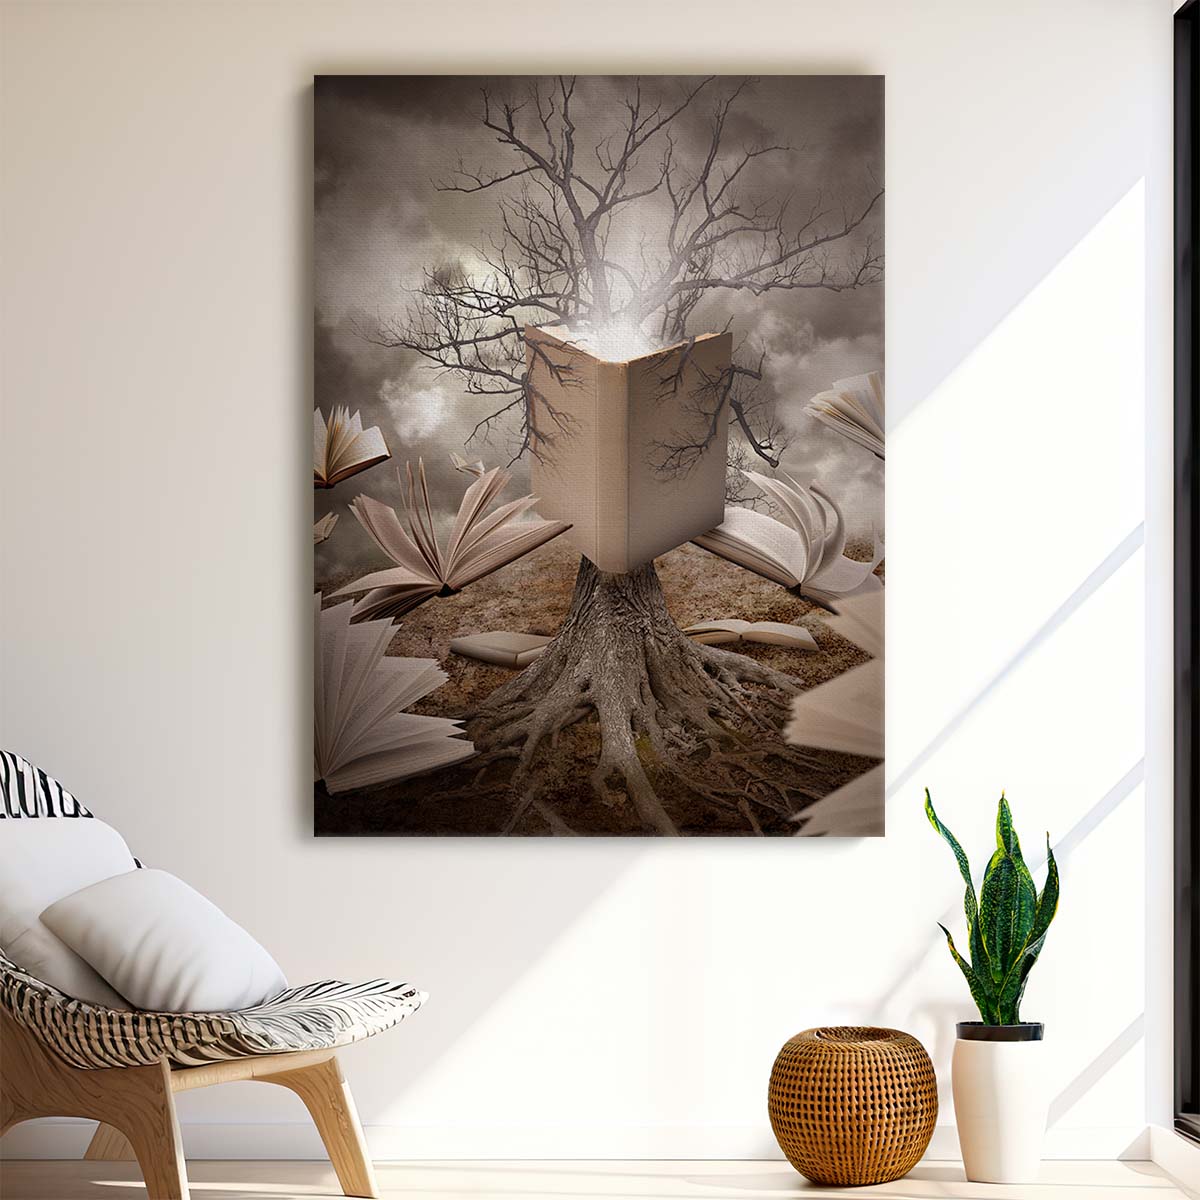 Surreal Old Tree Reading Book Photography Wall Art - Creative Edit by Luxuriance Designs, made in USA